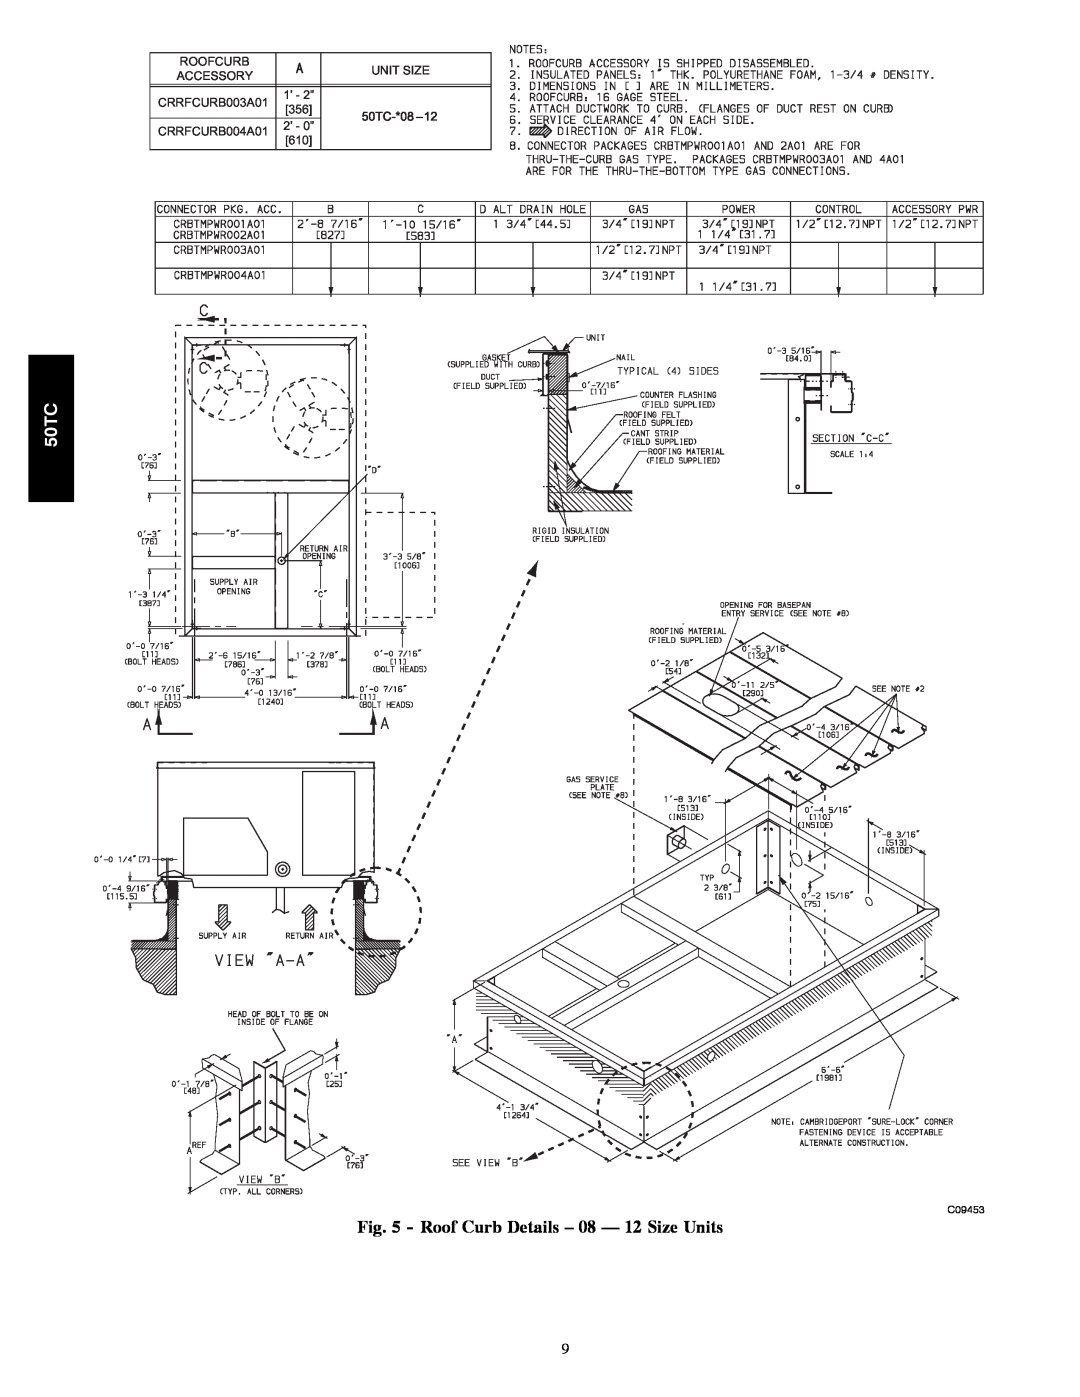 Carrier installation instructions Roof Curb Details - 08 - 12 Size Units, 50TC-*08, C09453 